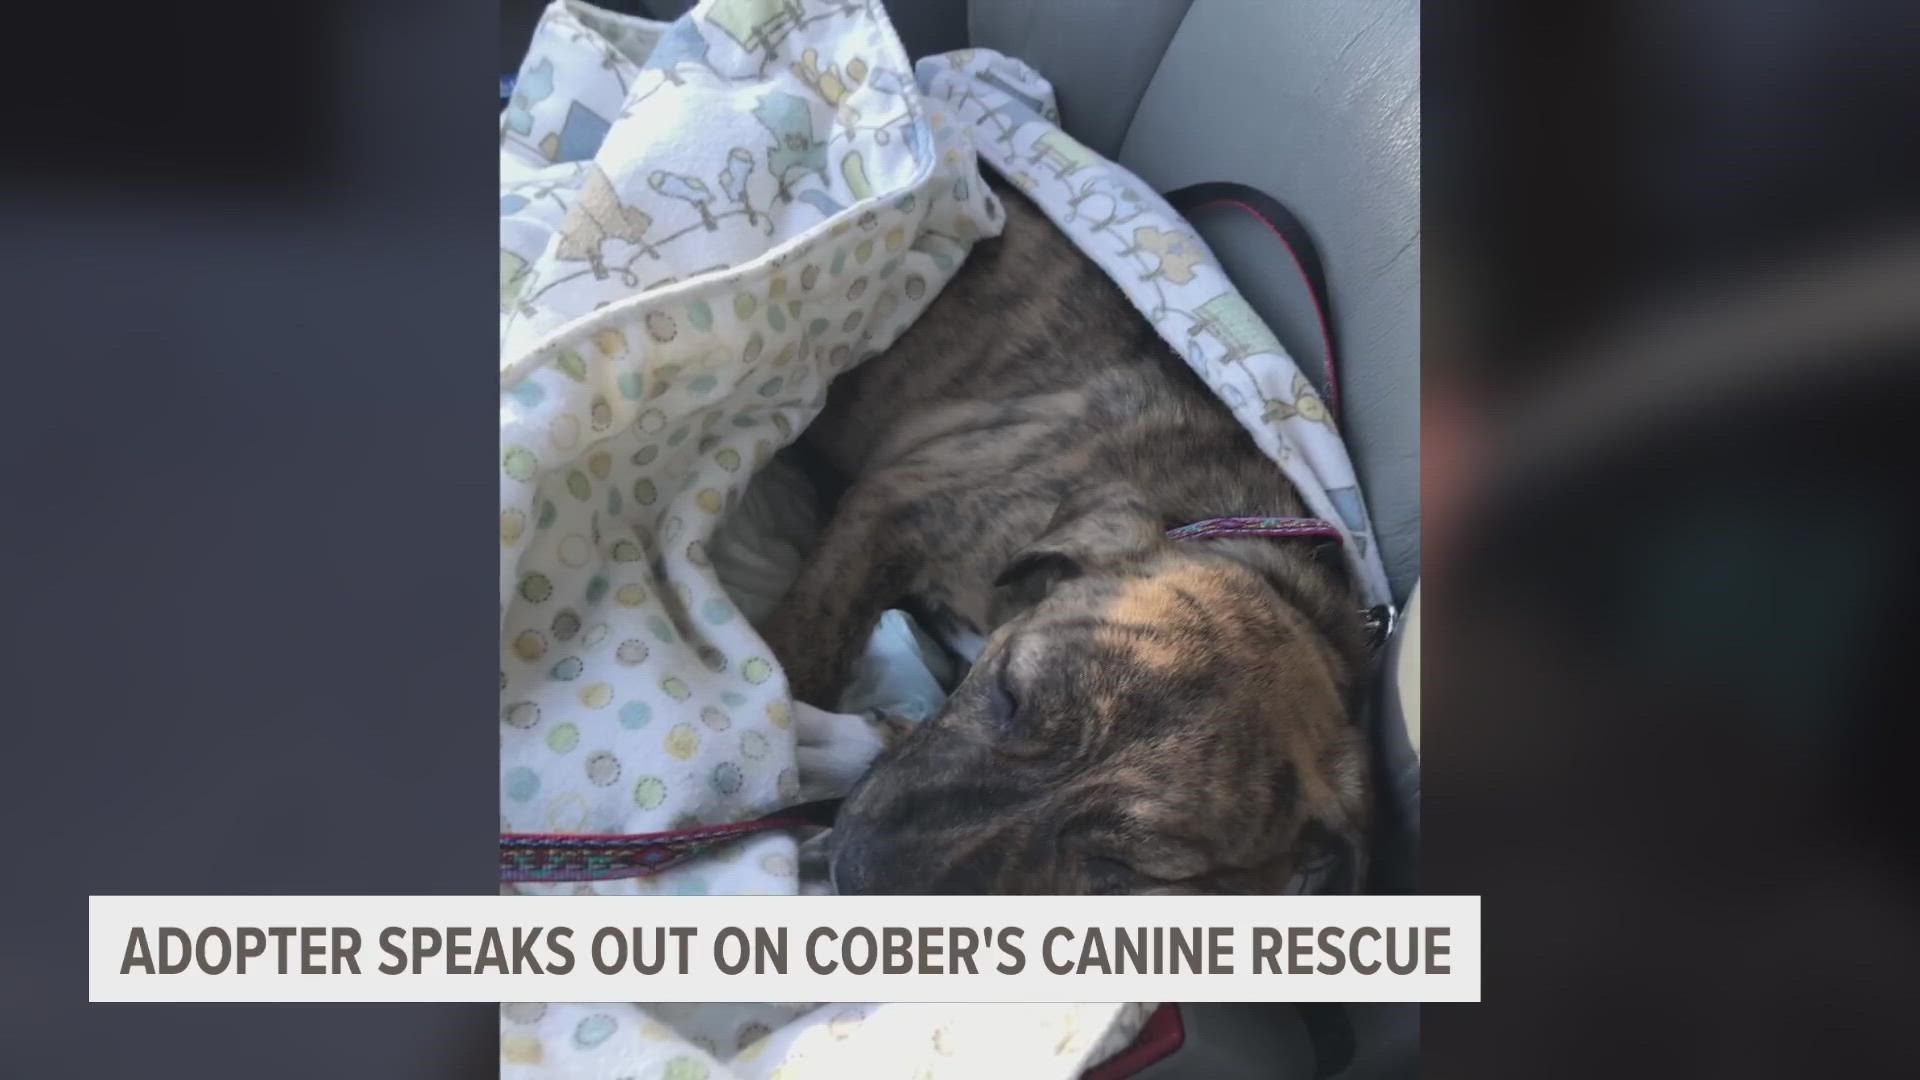 Bex Britz said they got a dog from Cober's Canines in May of 2020. The days following that adoption were filled with expensive trips to the vet.